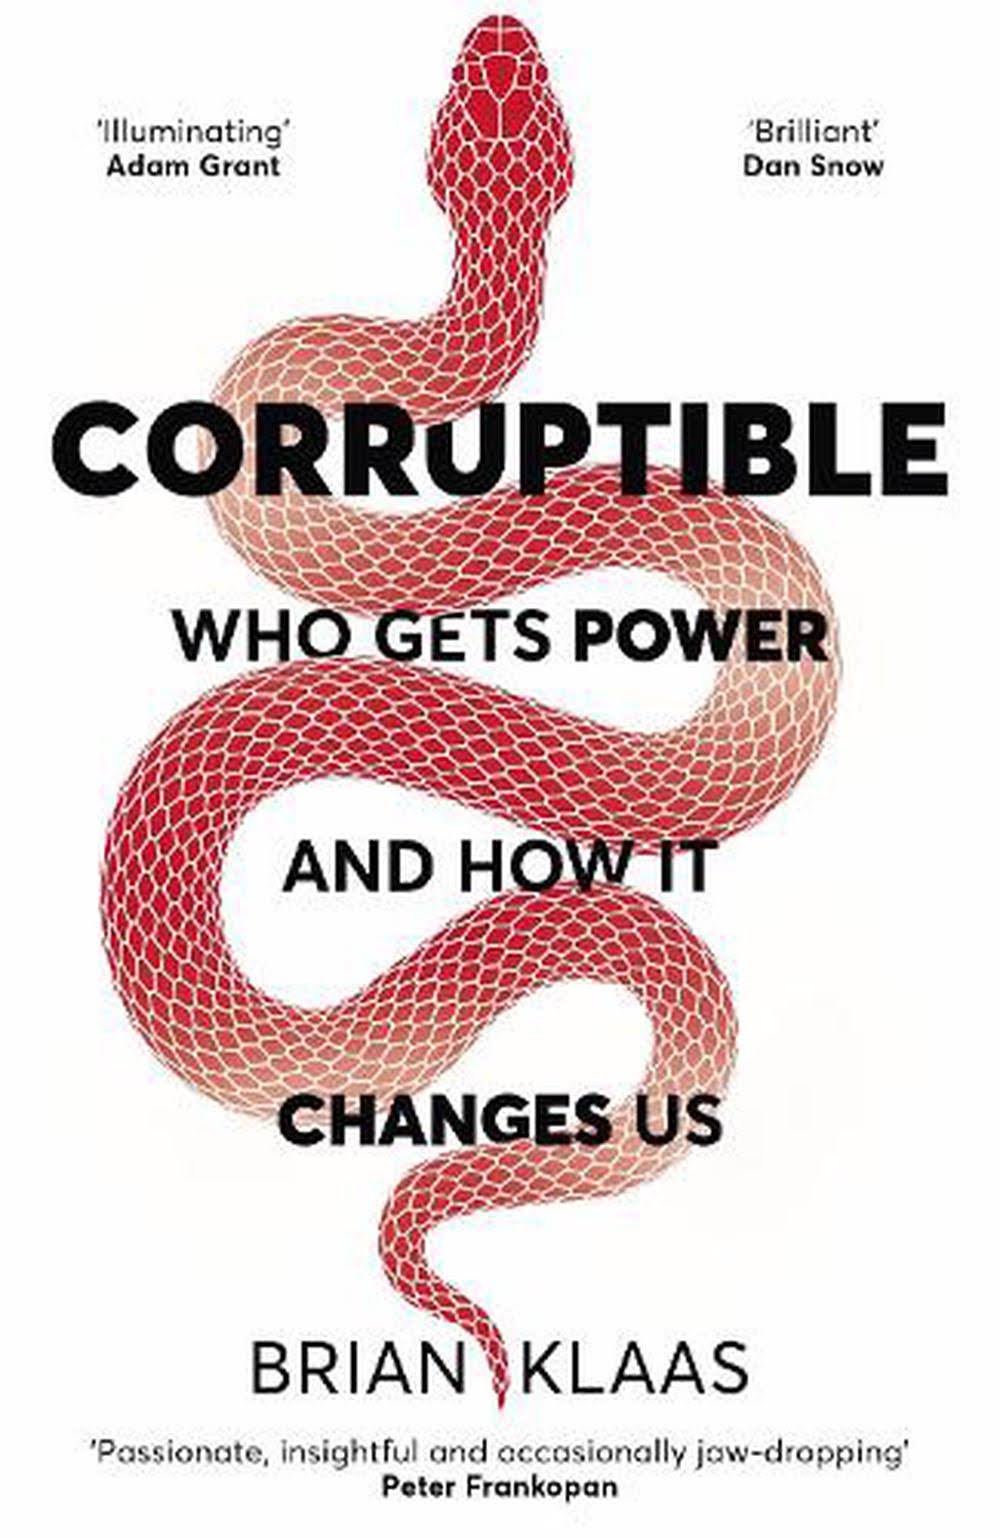 Corruptible: Who Gets Power and How It Changes Us [Book]